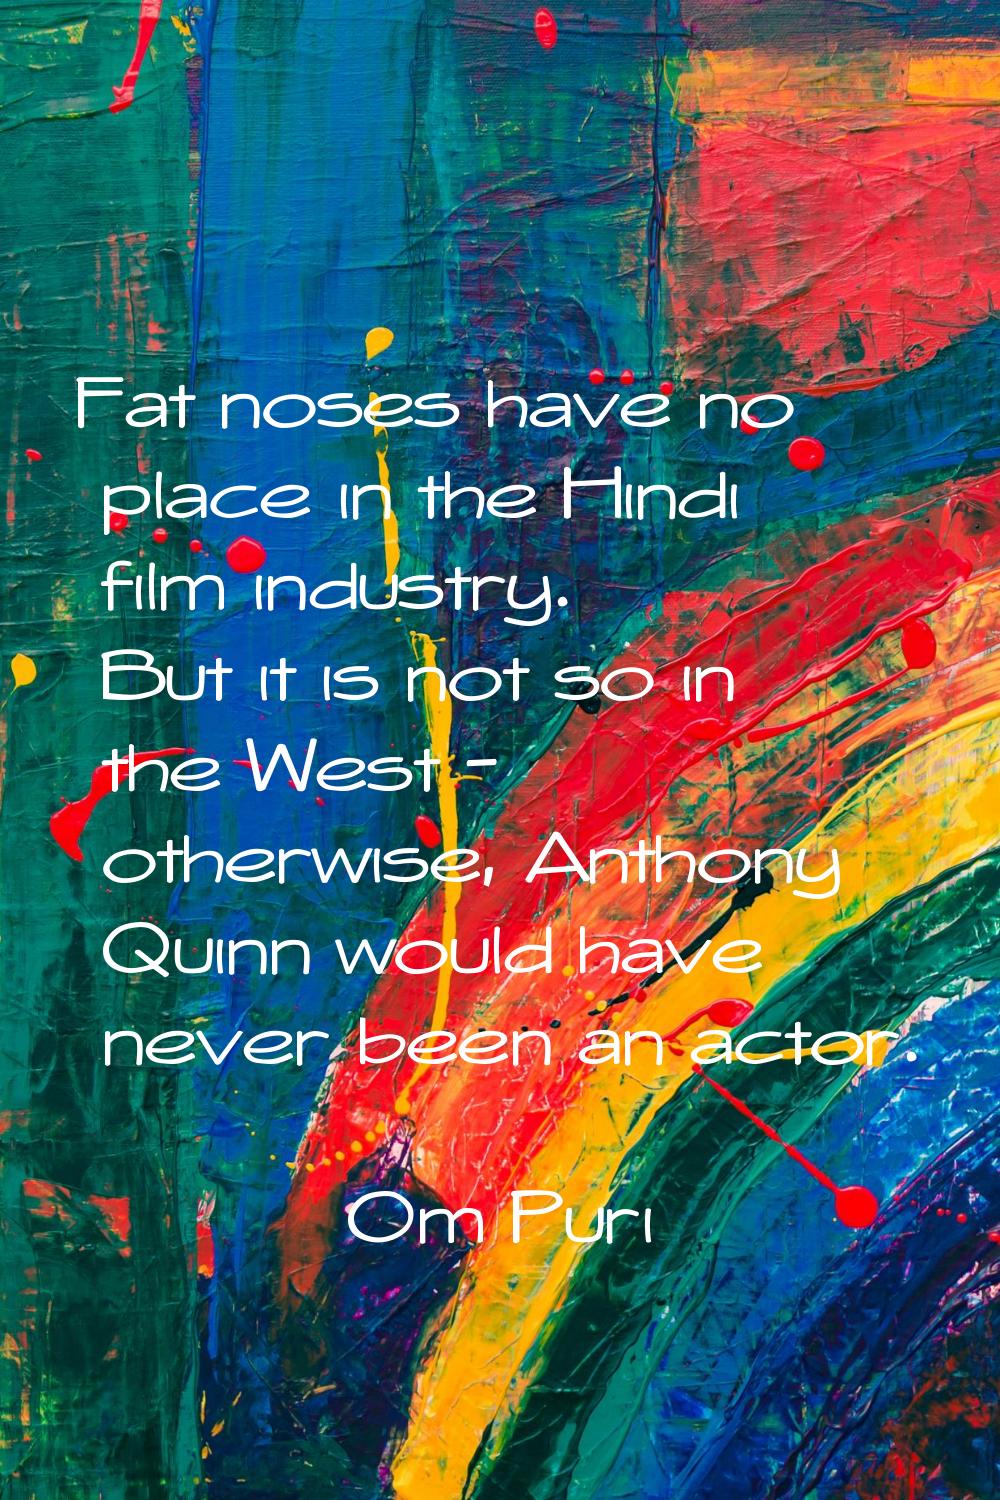 Fat noses have no place in the Hindi film industry. But it is not so in the West - otherwise, Antho